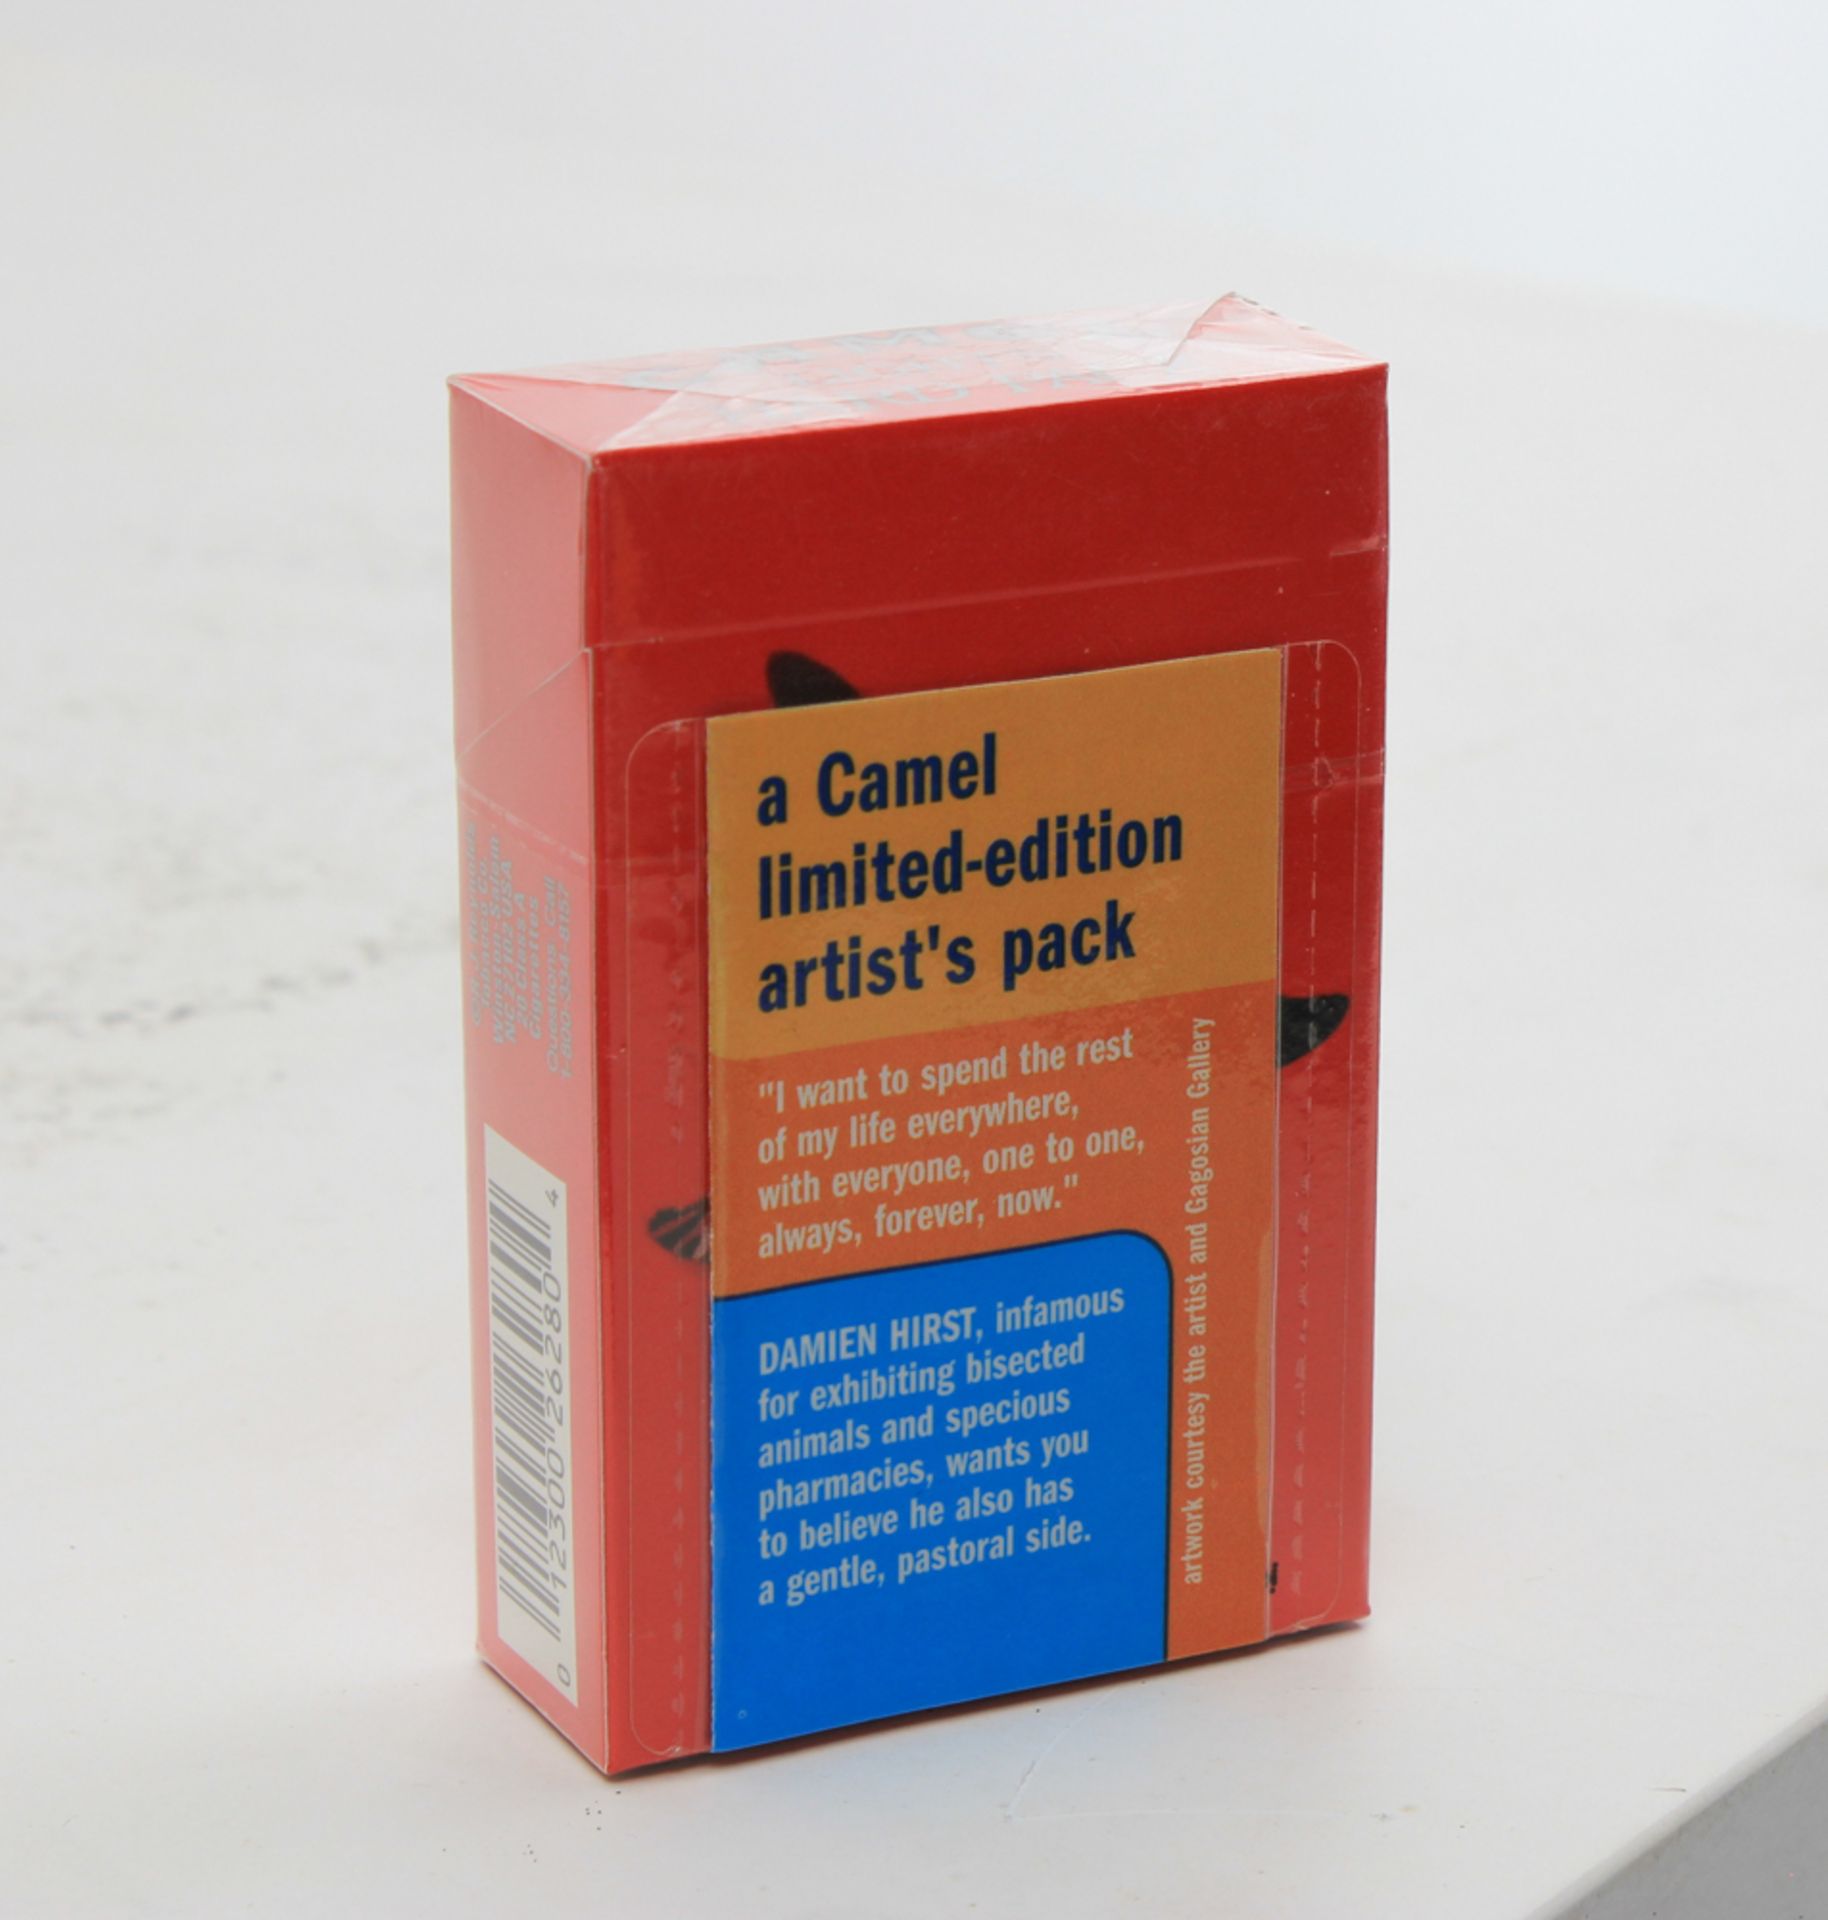 Damien Hirst (1965) Collector's item, Cigarette pack - a limited edition - Artist Pack by Damien - Image 3 of 5